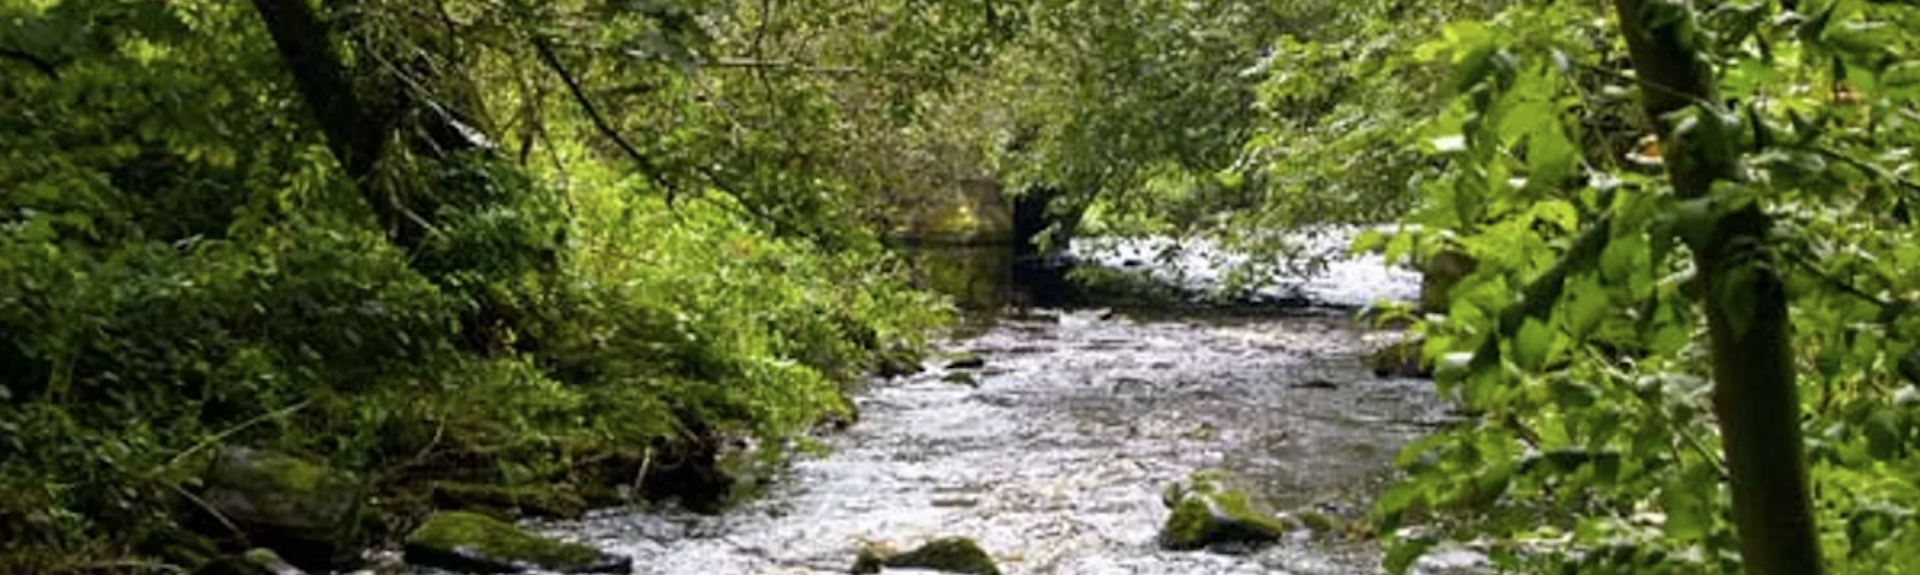 A wild river with overhanging trees flows through a wooded valley in the Northumberland National Park in early summer